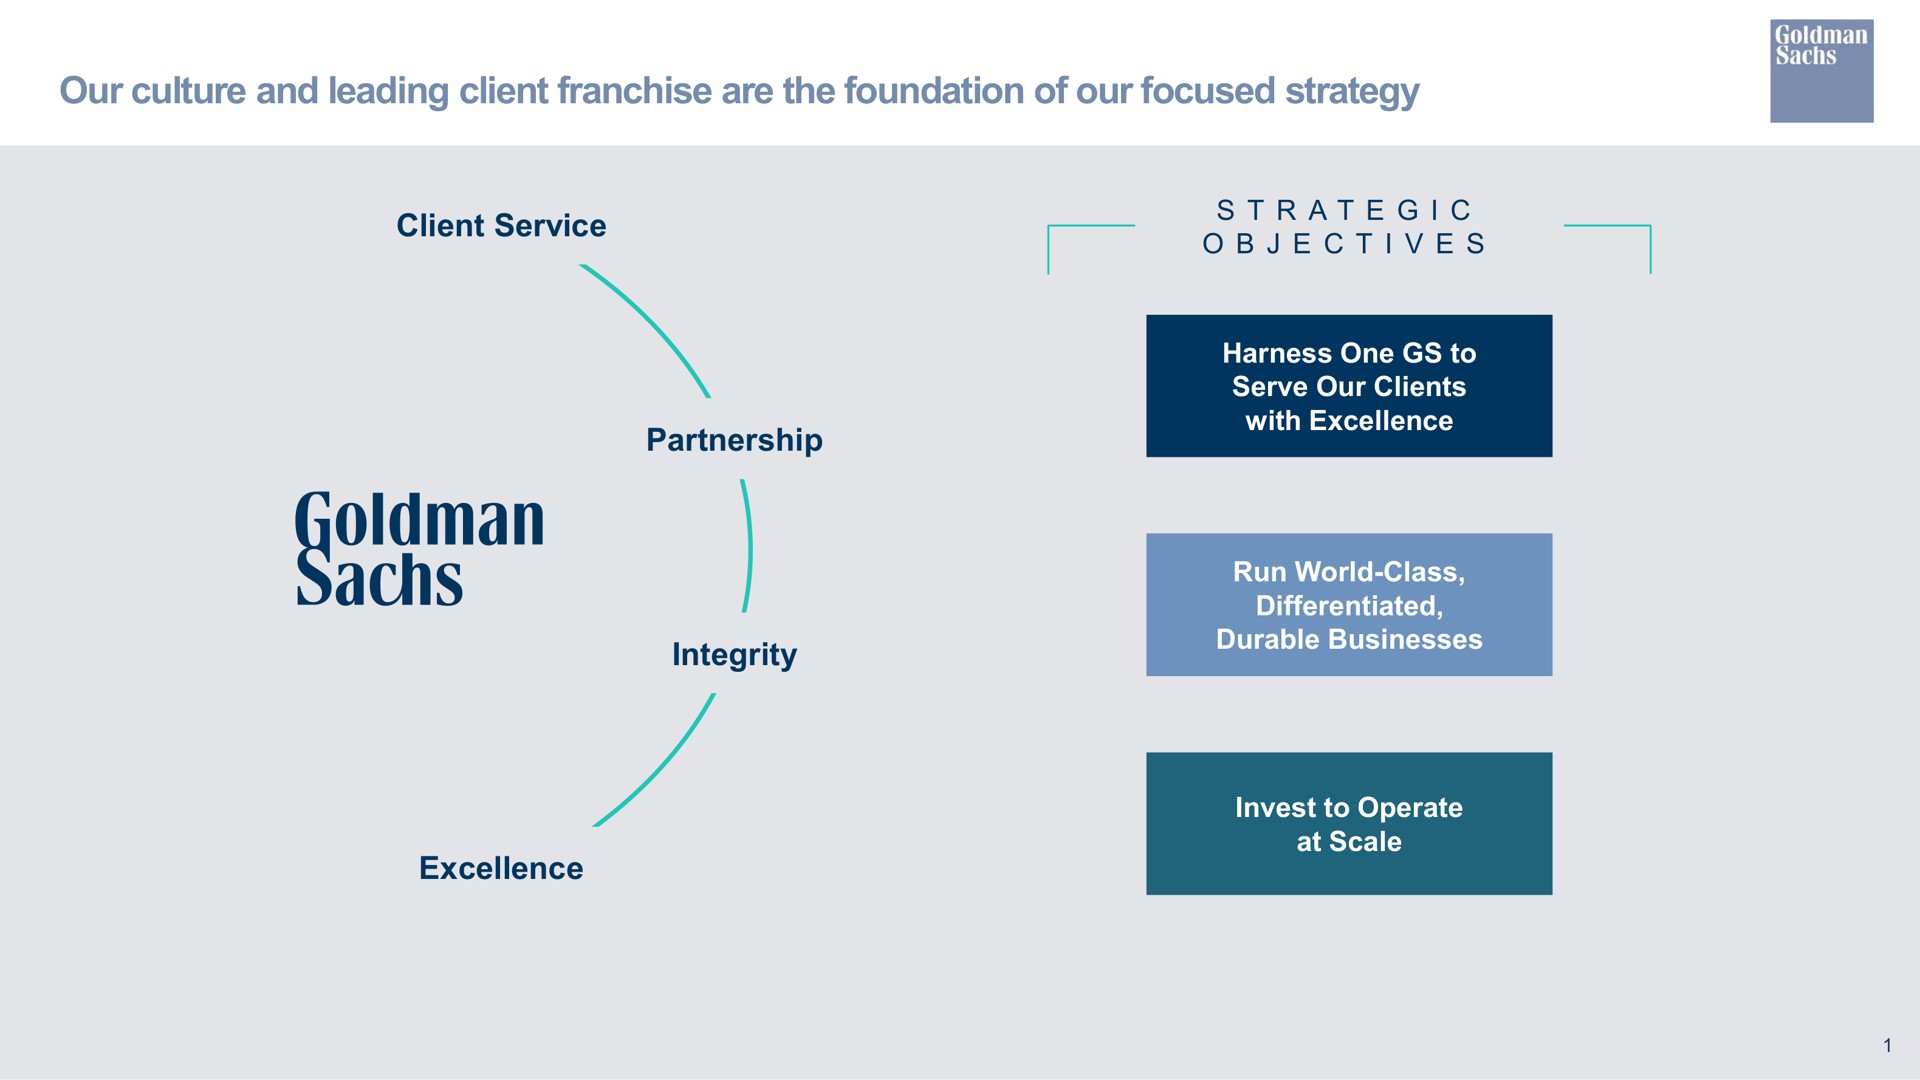 our culture and leading client franchise are the foundation of our focused strategy client service excellence partnership integrity a i i harness one to serve our clients with excellence run world class differentiated durable businesses invest to operate at scale | Goldman Sachs